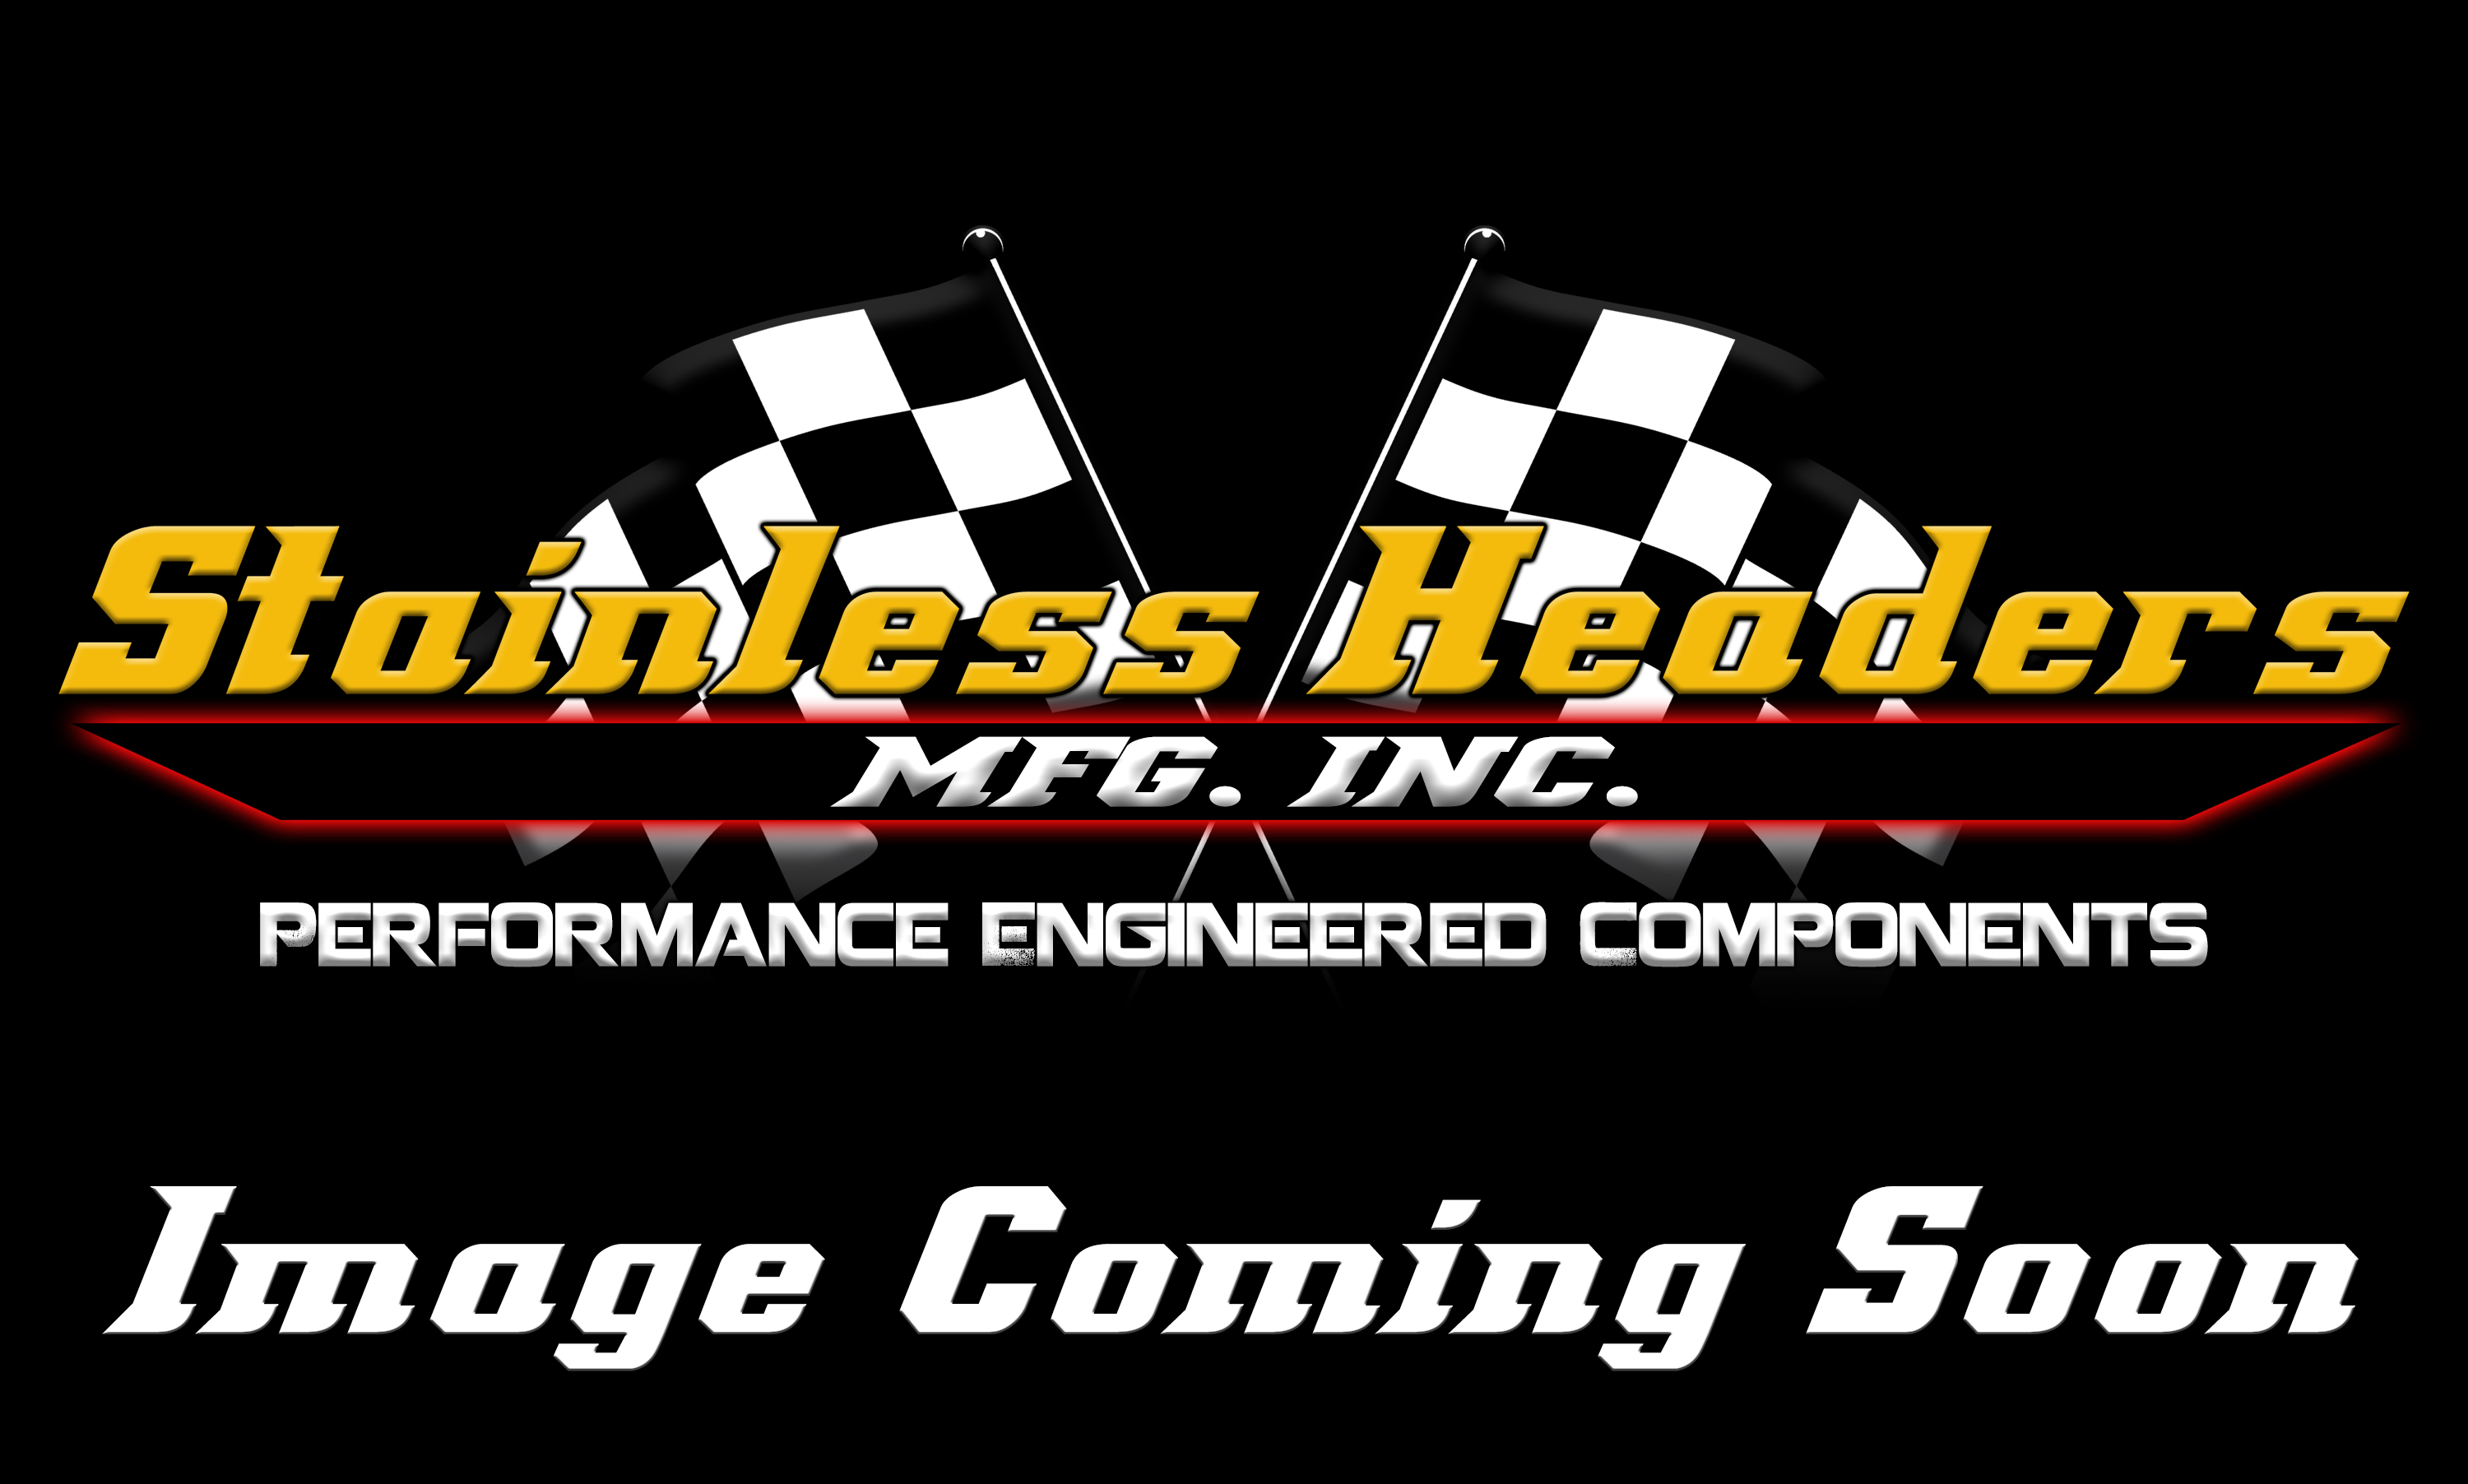 CompTurbo Technology Turbochargers - Comp Turbo Journal Bearing Turbochargers - CompTurbo Technologies - CTR3593E-6262 360 Journal Bearing Turbocharger (800 HP)